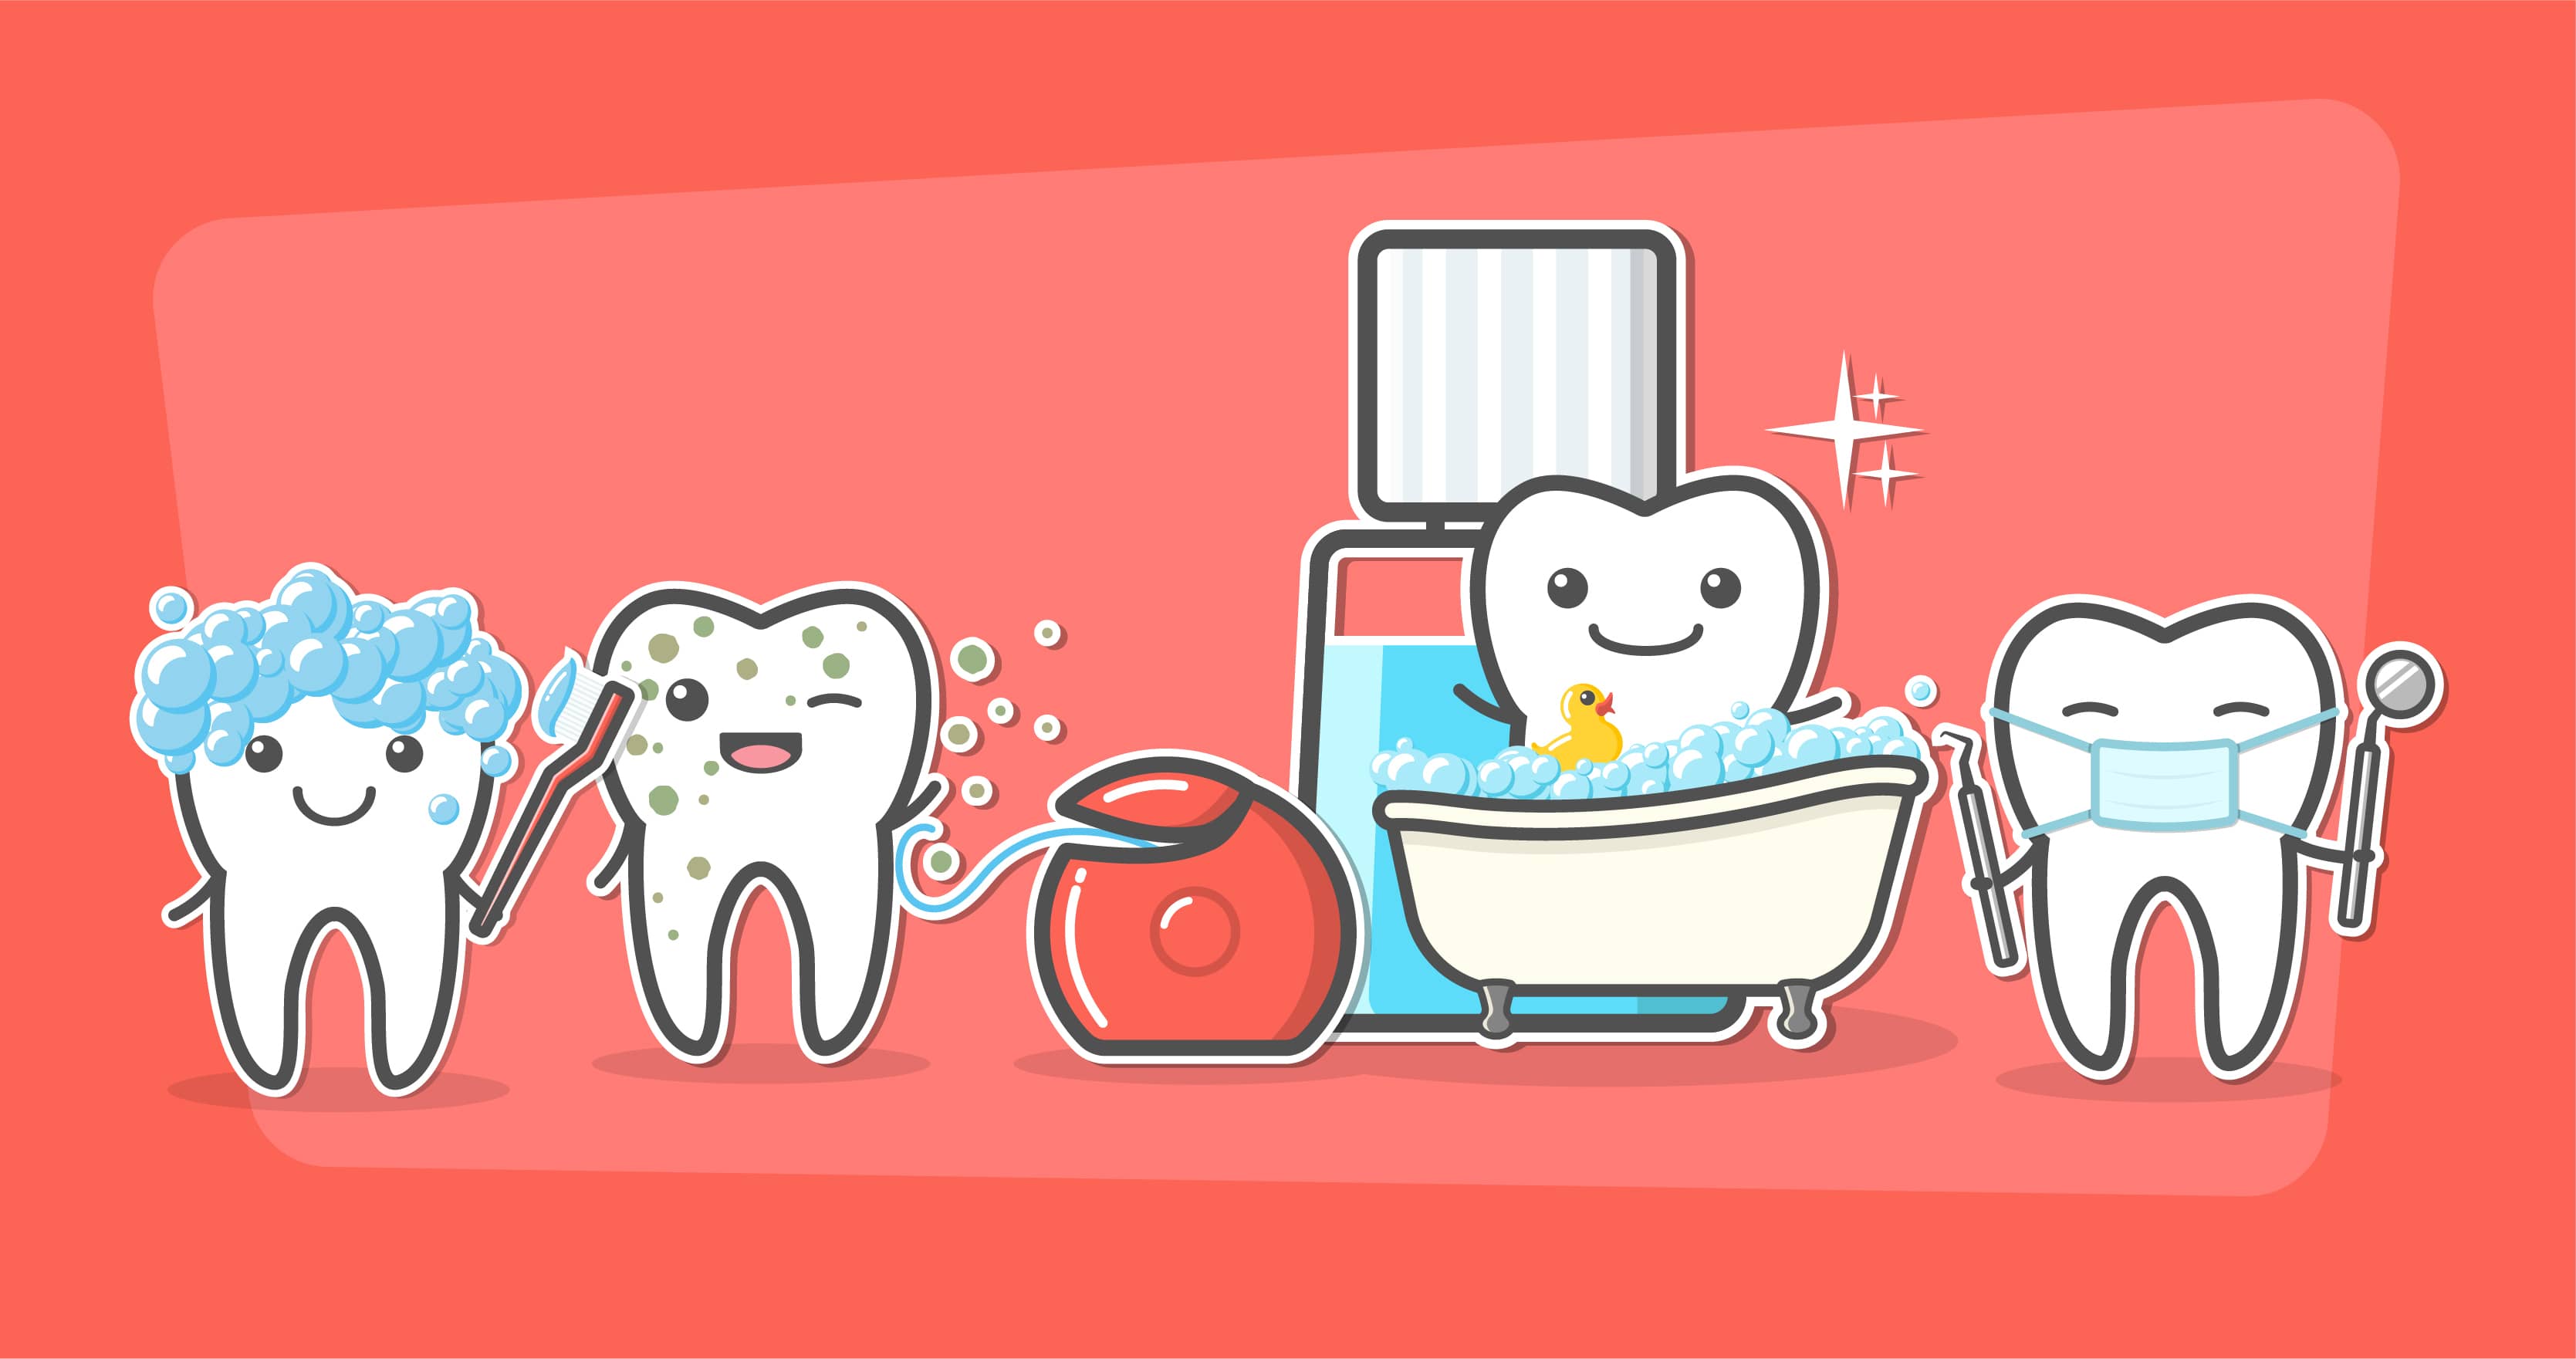 Tips for taking care of your teeth to stay healthy